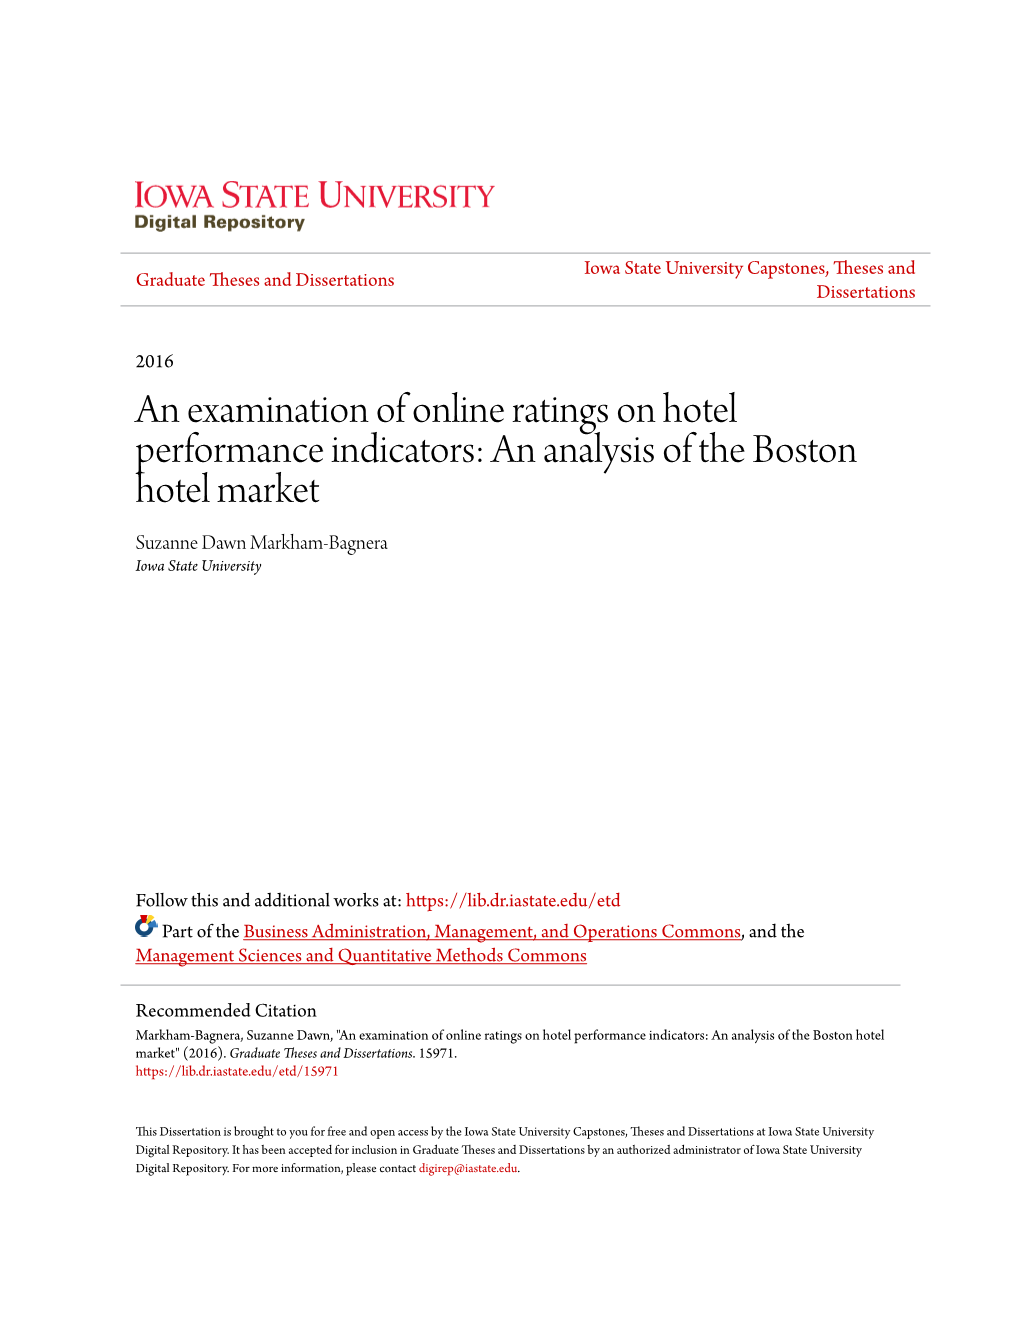 An Examination of Online Ratings on Hotel Performance Indicators: an Analysis of the Boston Hotel Market Suzanne Dawn Markham-Bagnera Iowa State University